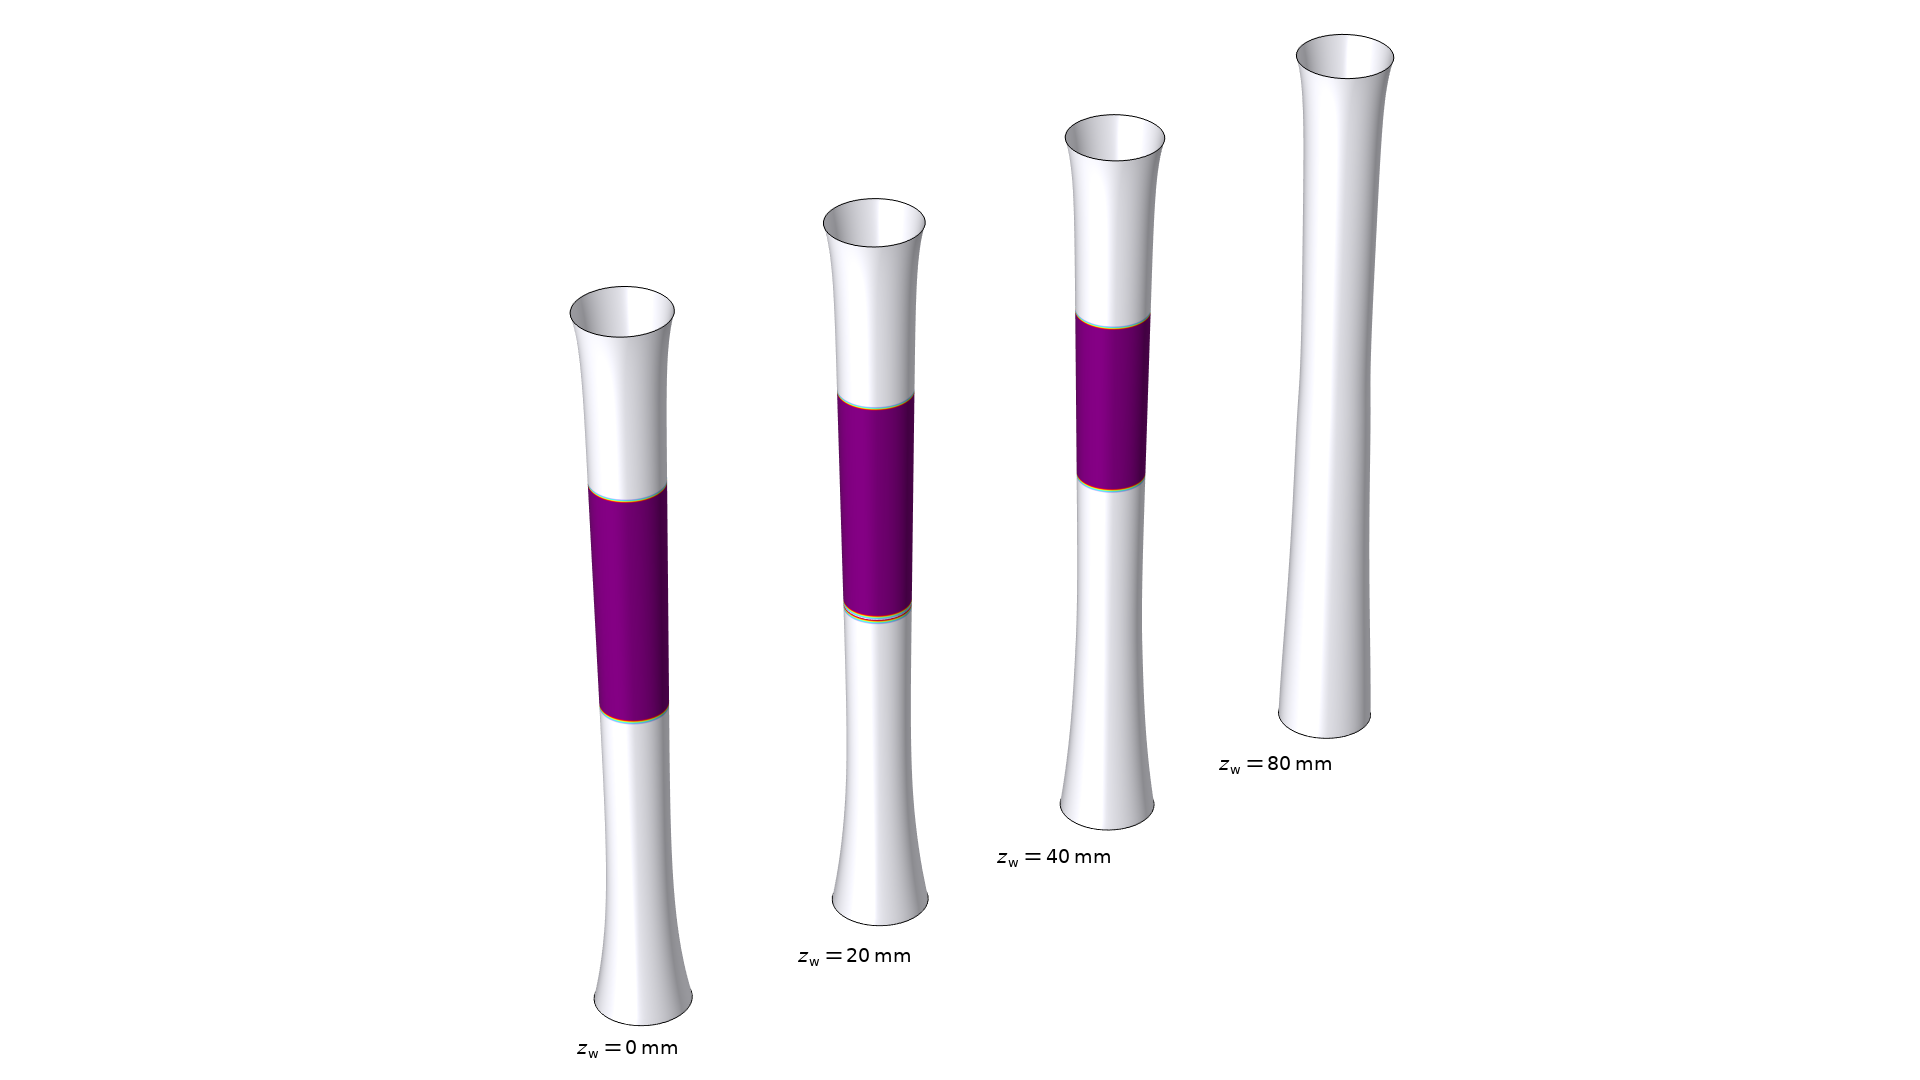 Four cylindrical models showing the wrinkled regions in purple.